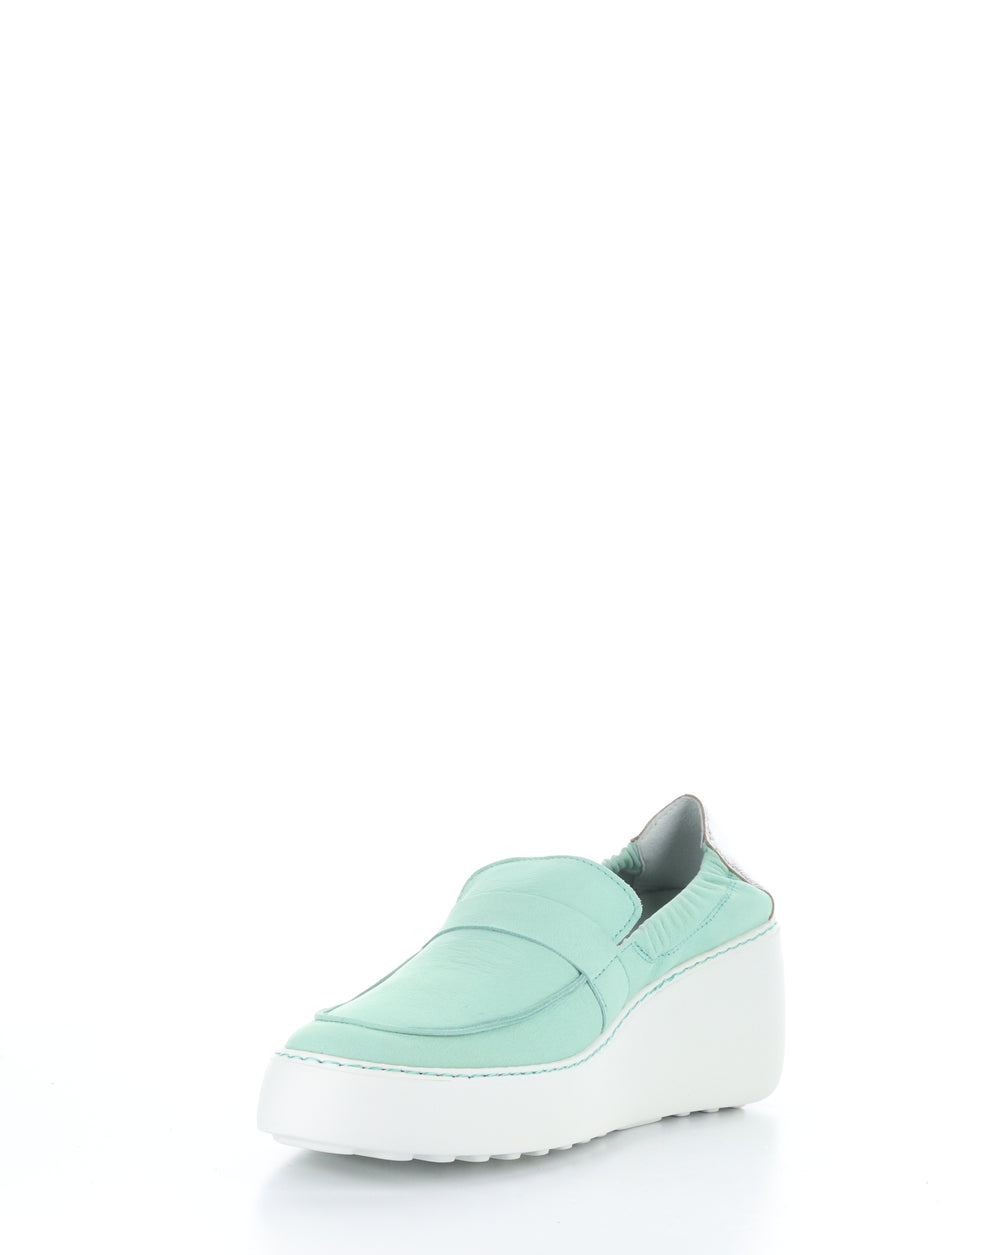 DULI620FLY Green Elasticated Shoes